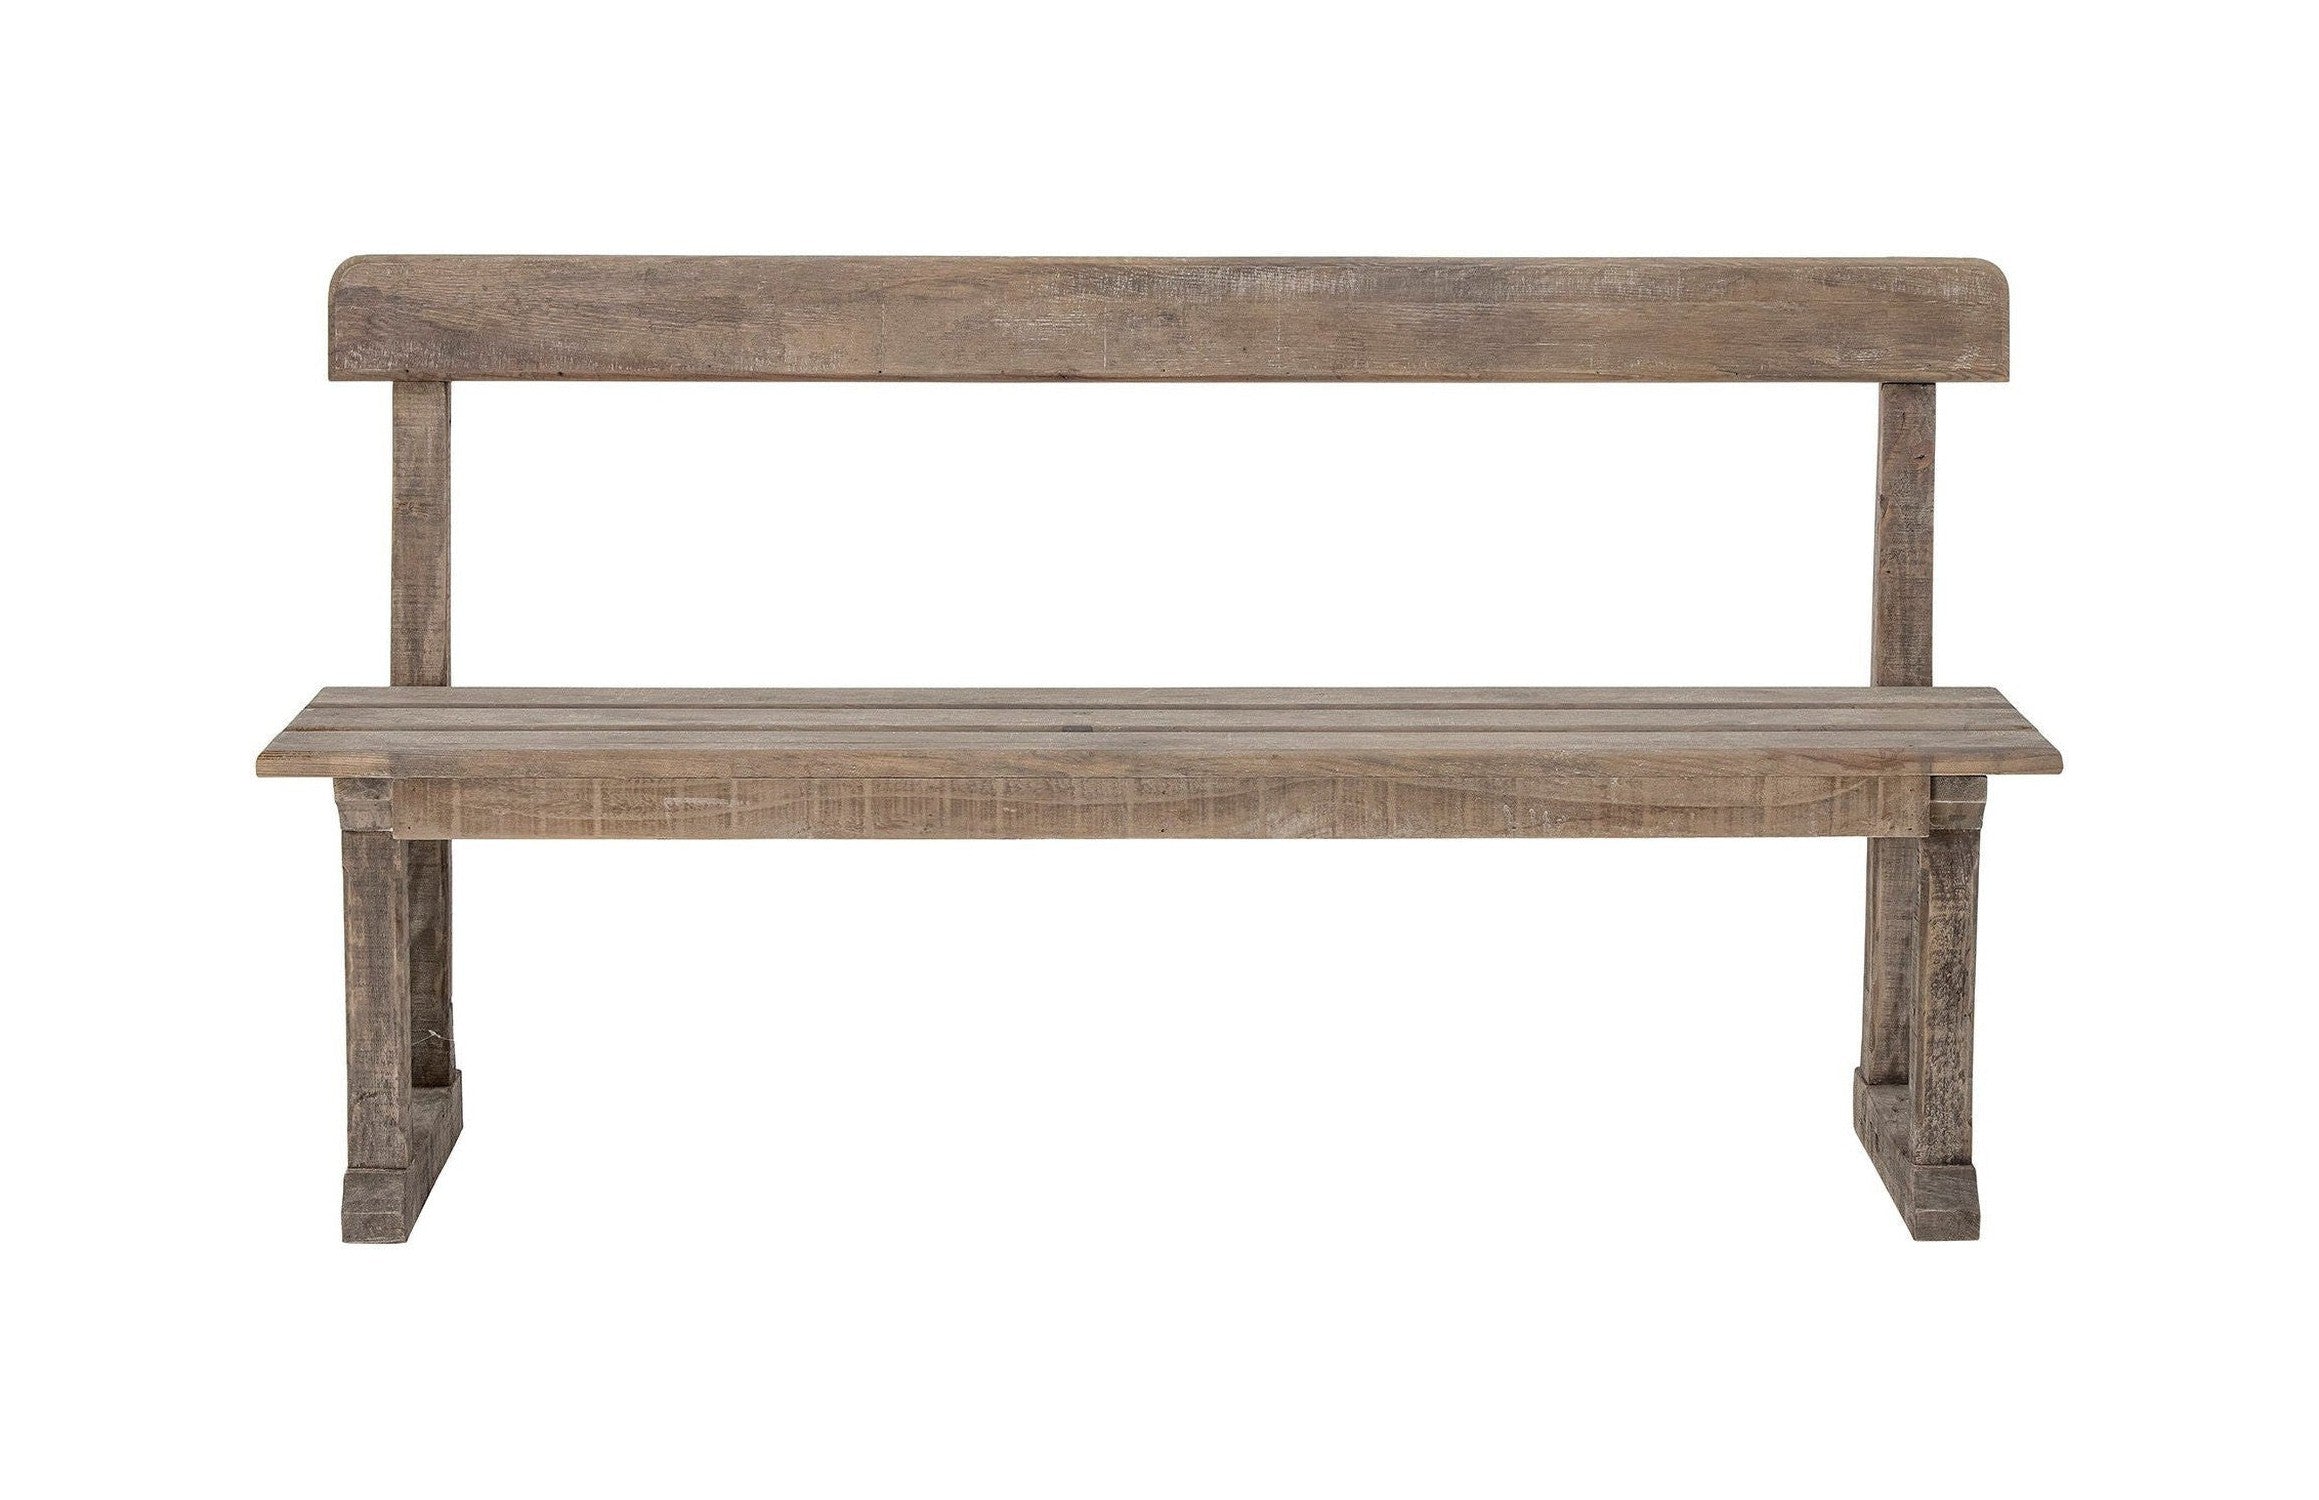 Creative Collection Portland Bench, Nature, Reclaimed Pine Wood